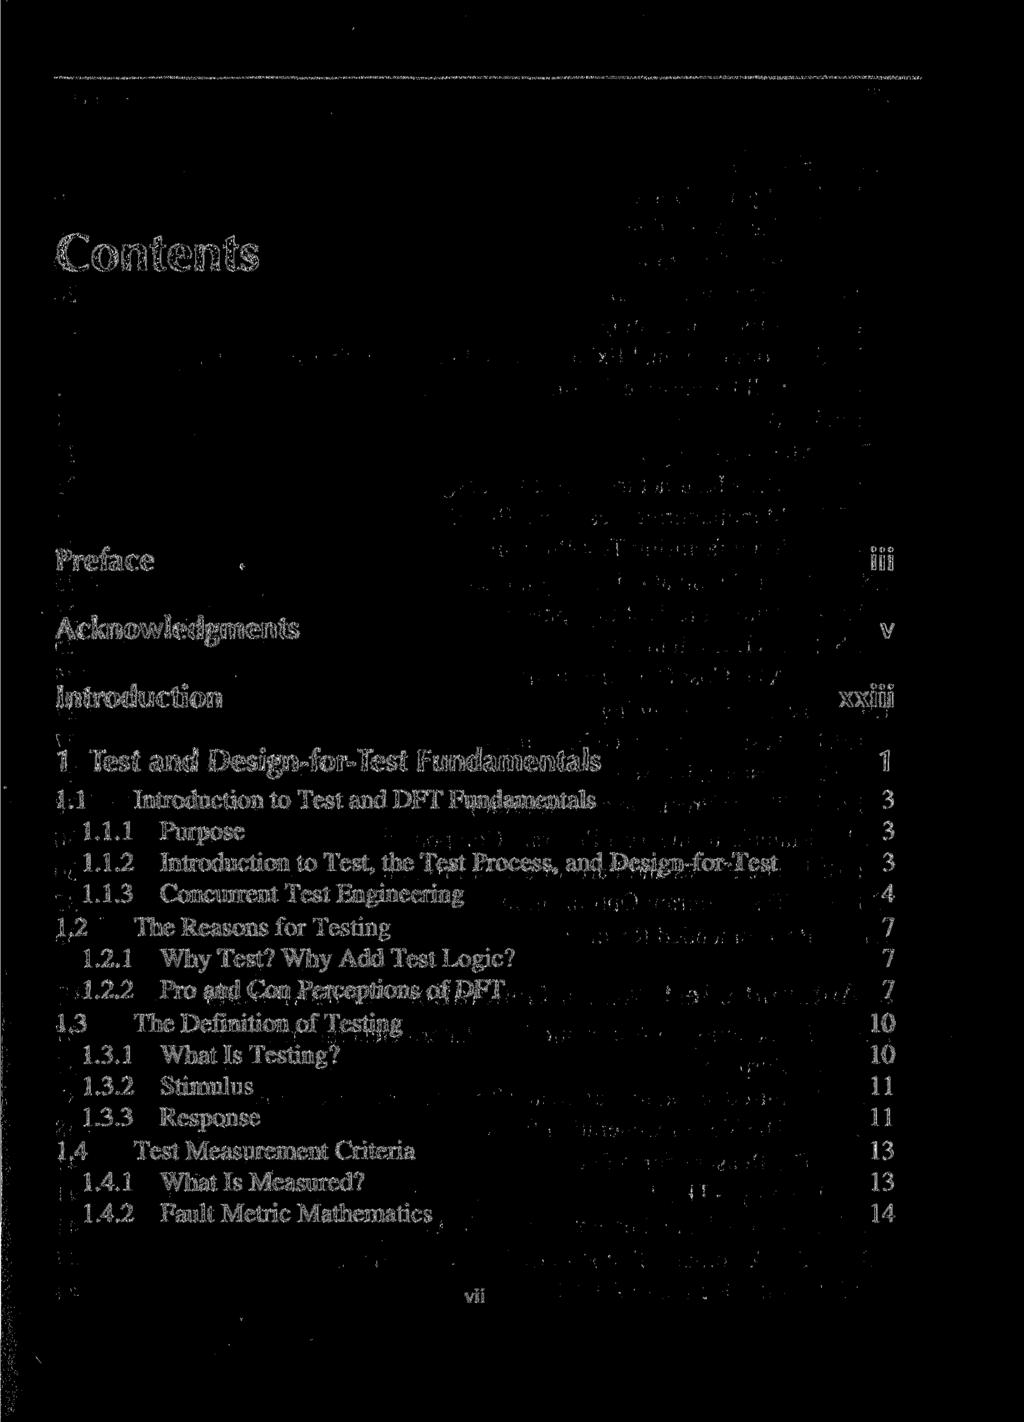 Contents Preface Acknowledgments Introduction iii v xxiii 1 Test and Design-for-Test Fundamentals 1 1.1 Introduction to Test and DFT Fundamentals 3 1.1.1 Purpose 3 1.1.2 Introduction to Test, the Test Process, and Design-for-Test 3 1.